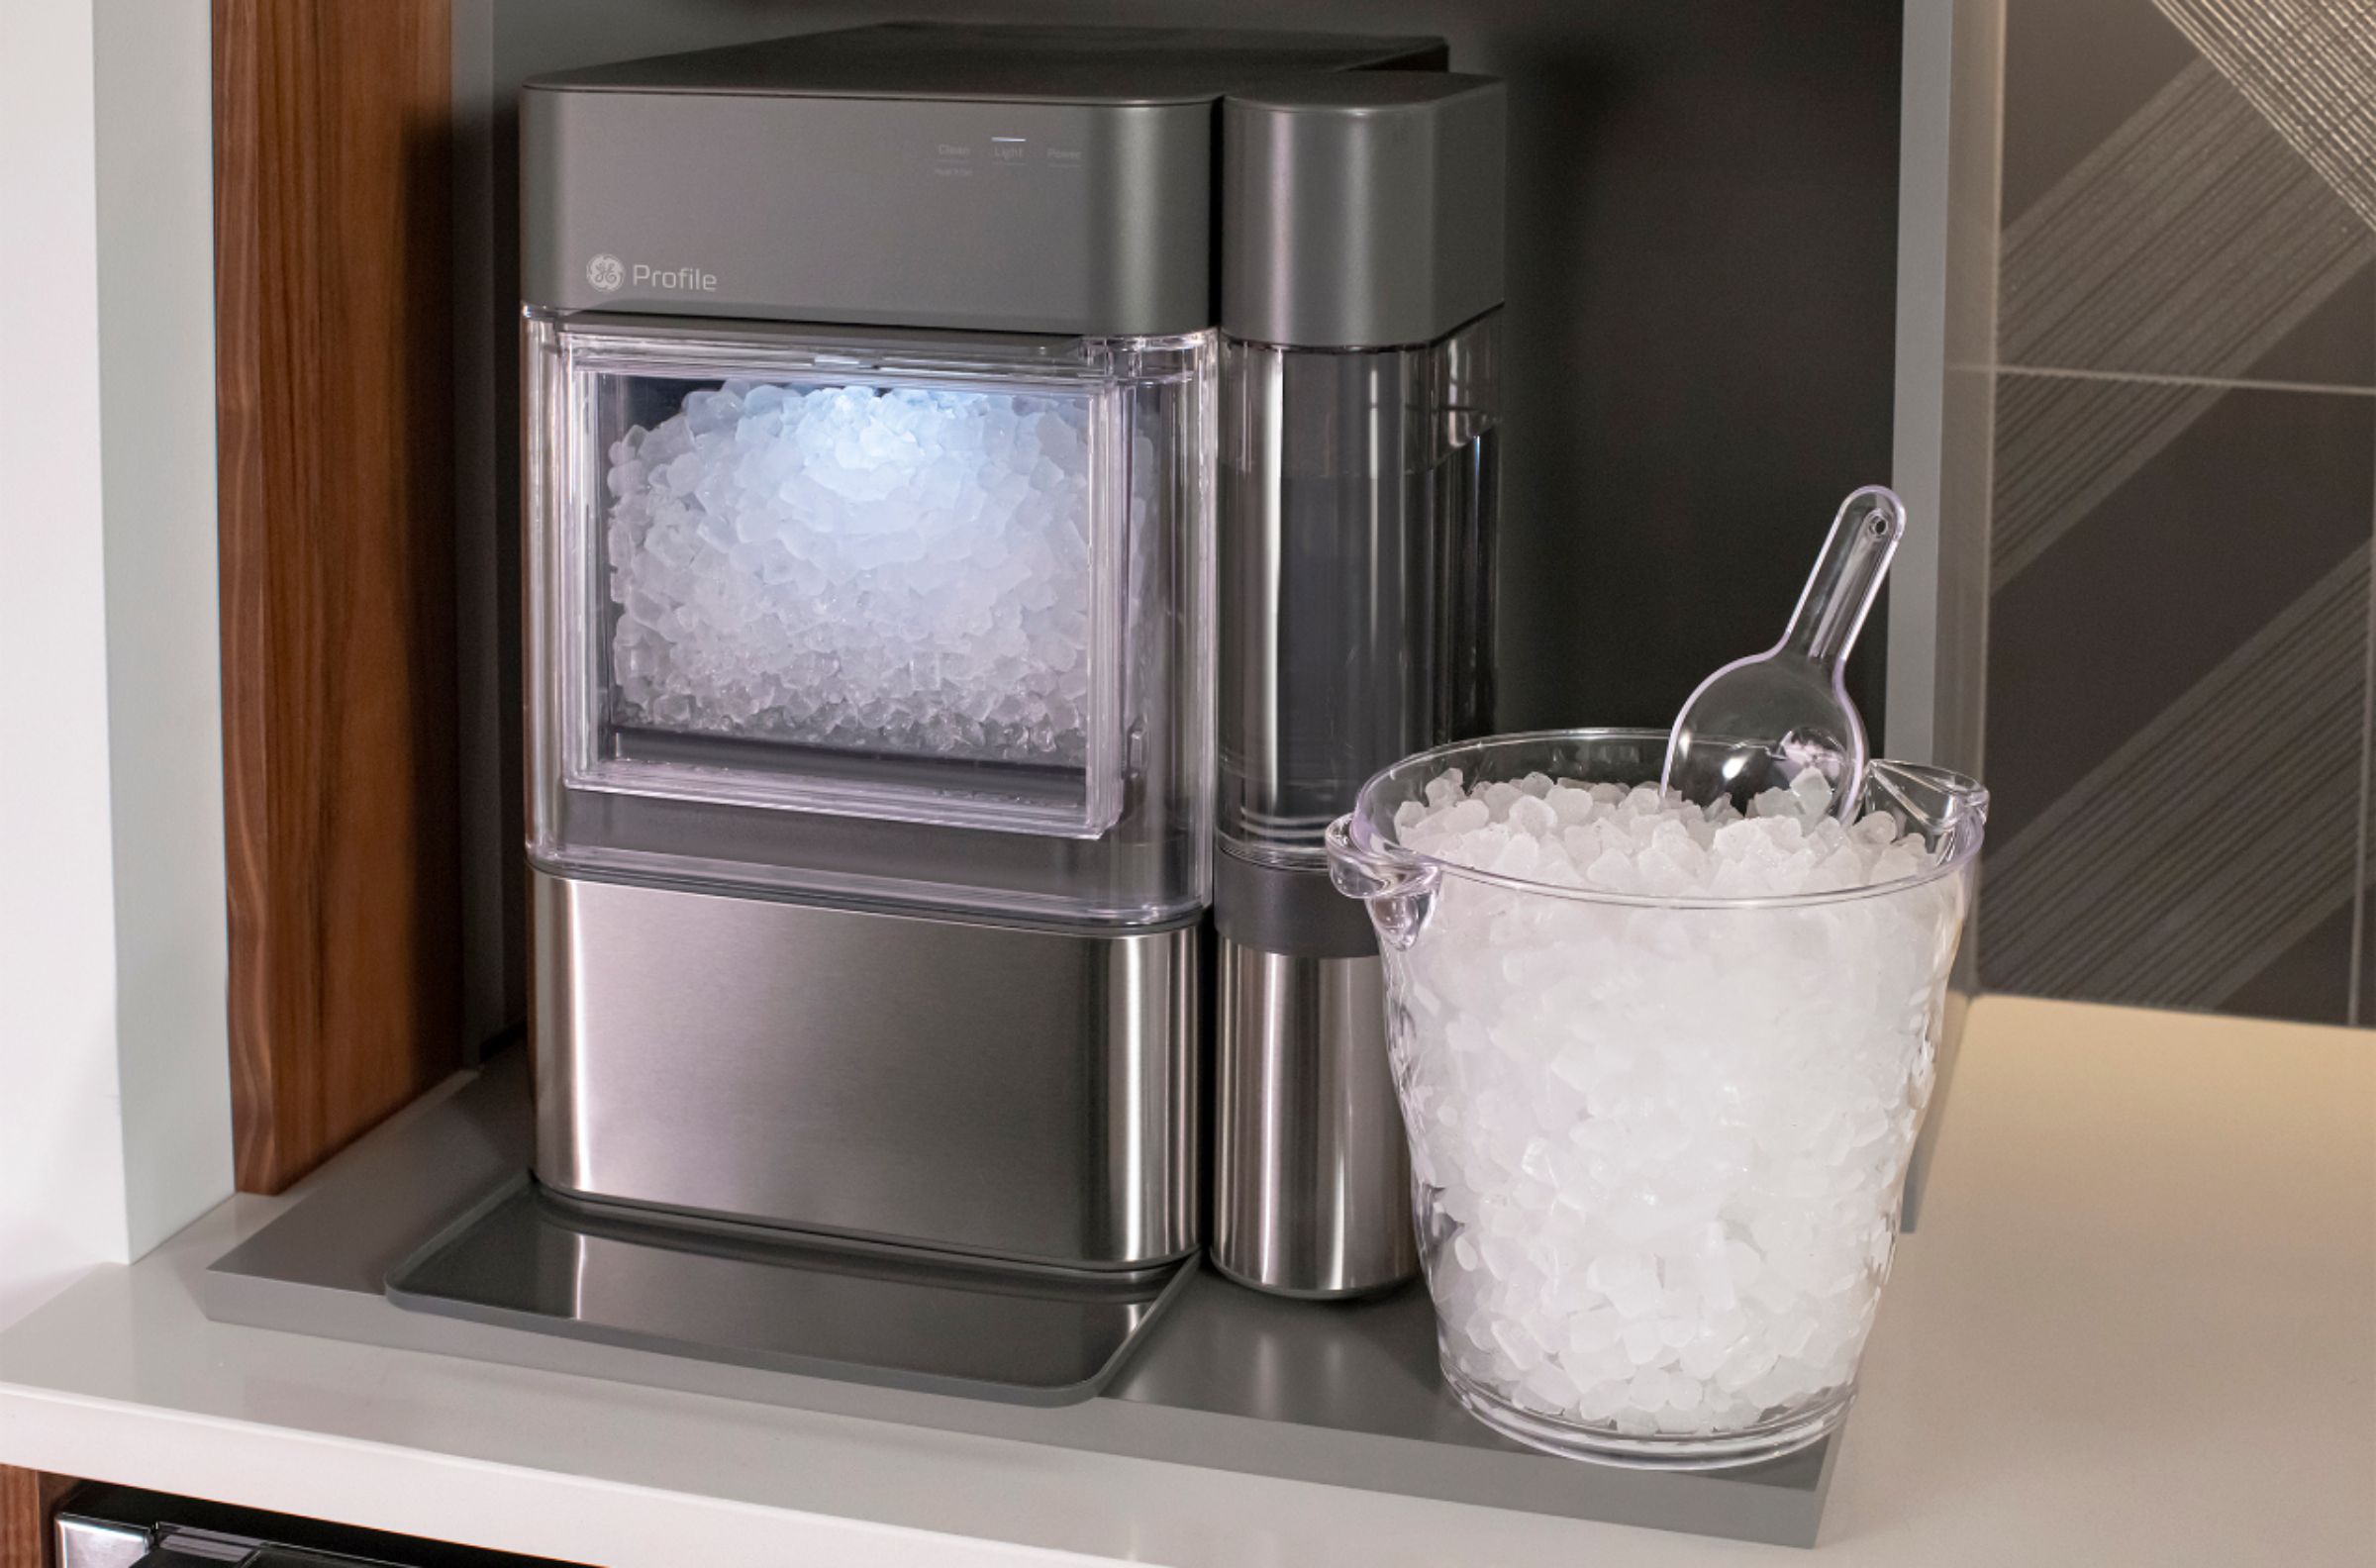 GE Profile Opal 2.0 38-lb. Portable Ice maker with Nugget Ice